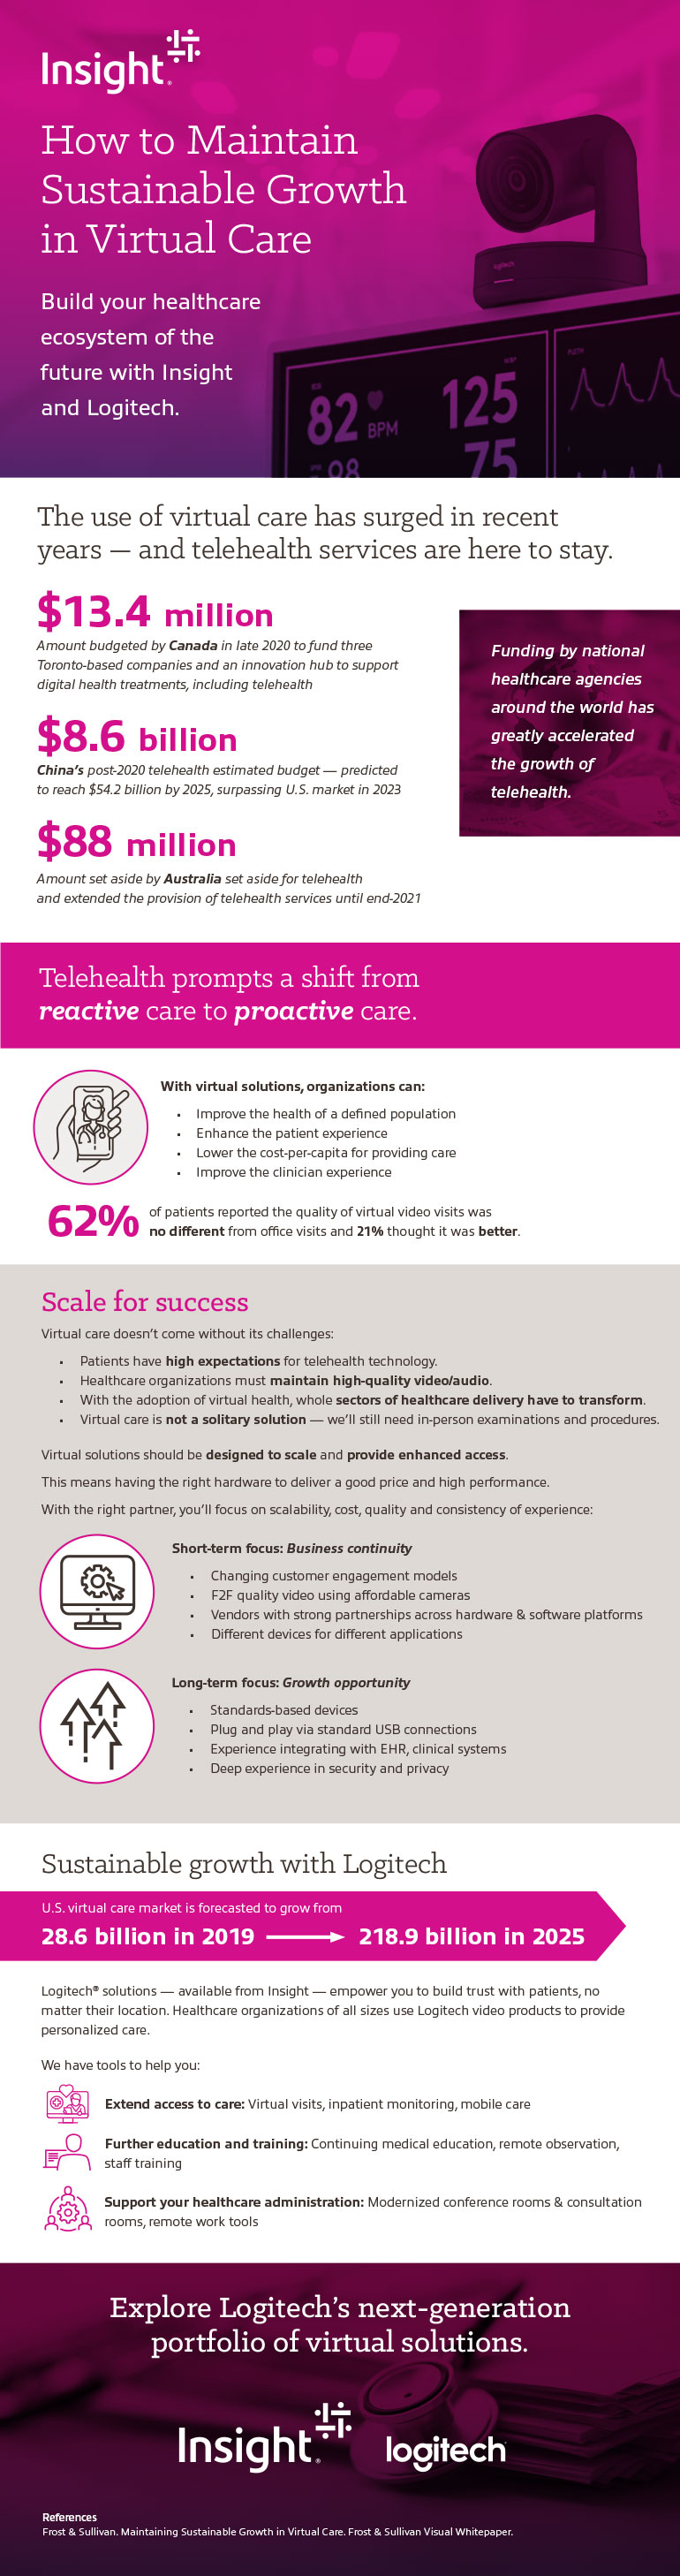 How to Maintain Sustainable Growth in Virtual Care infographic as transcribed below